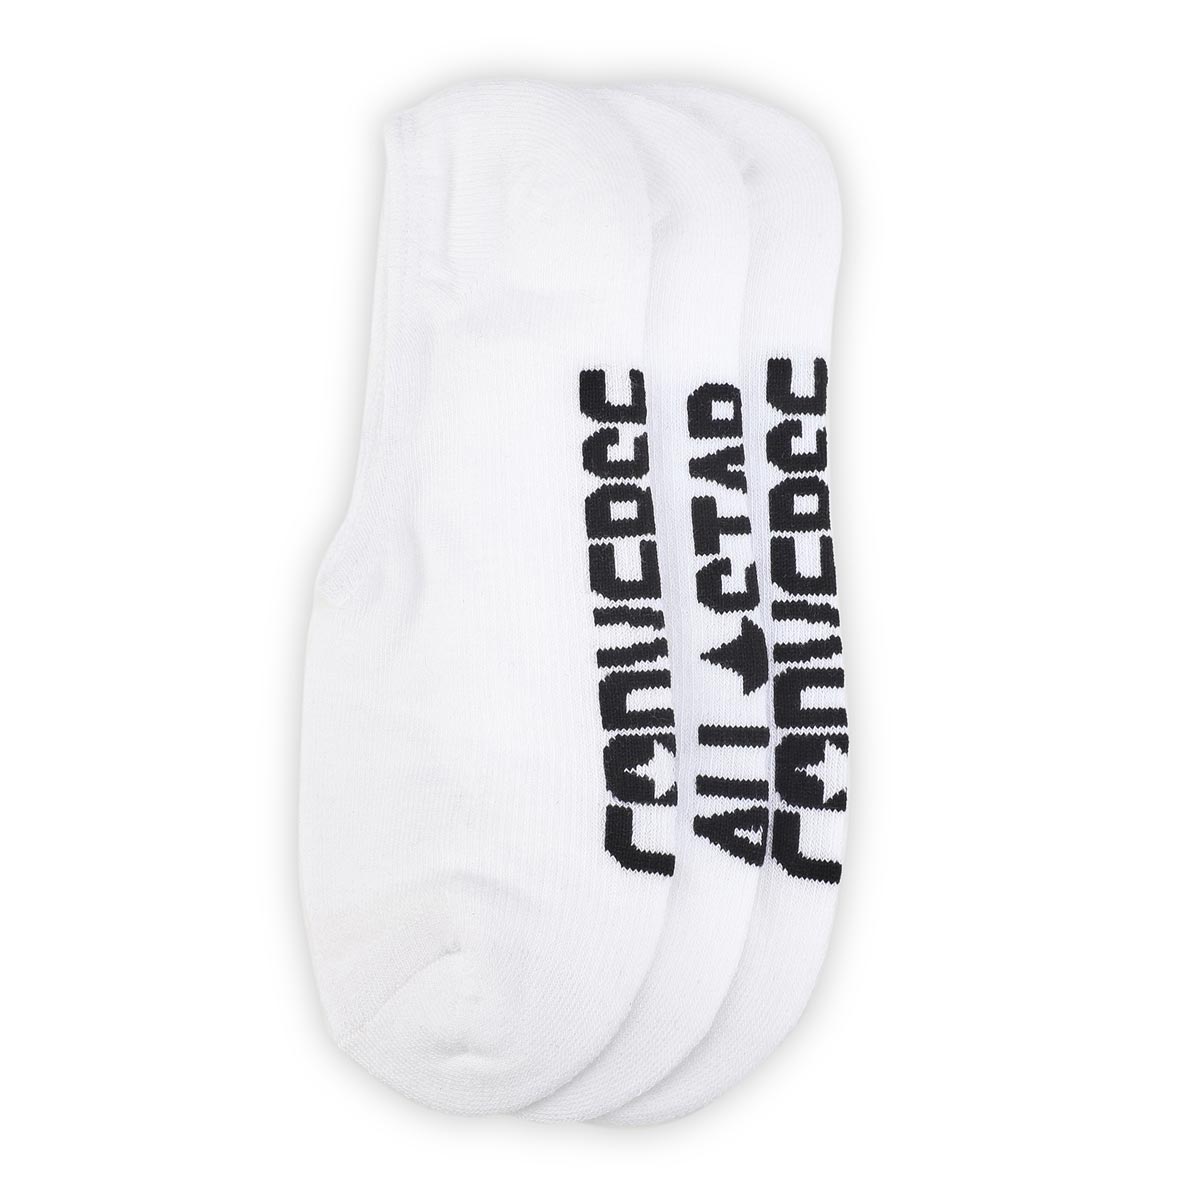 Socquettes invisibles MFC OX, blanc, hommes - 3 p.